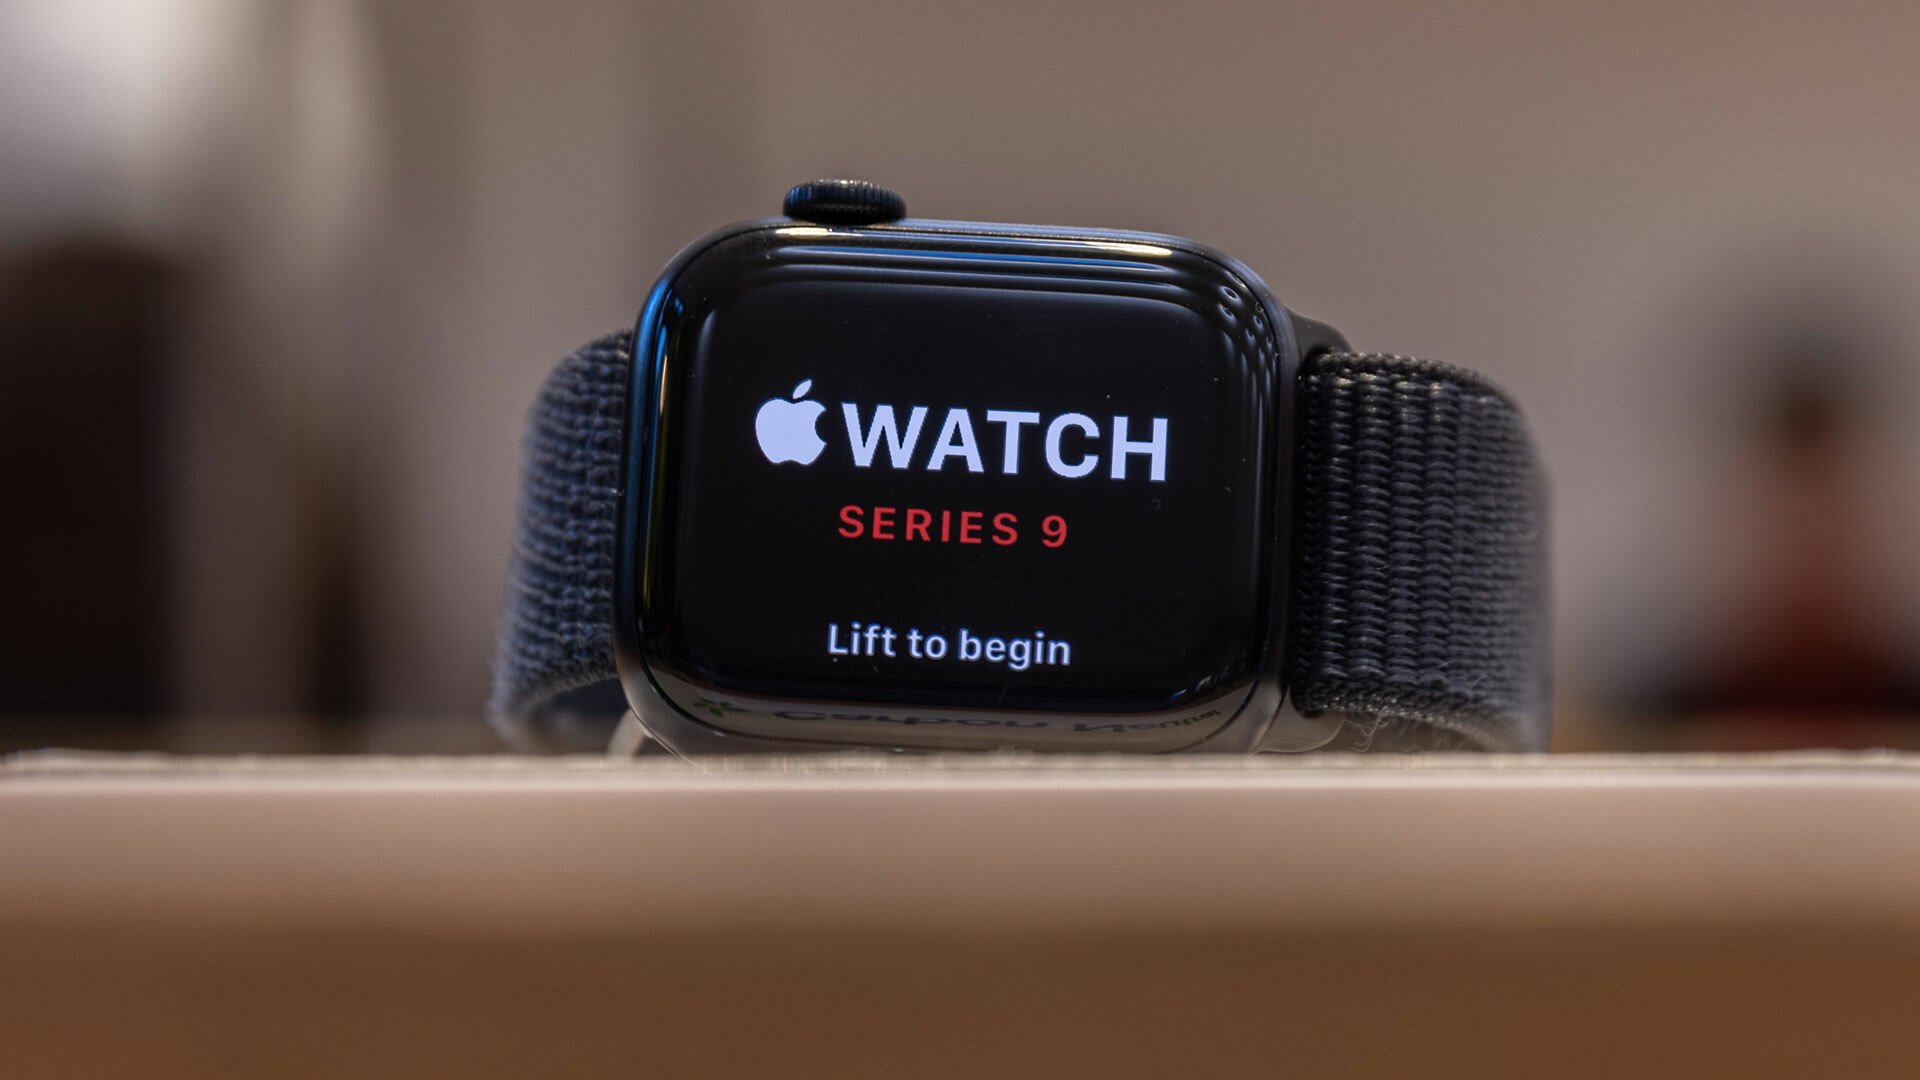 An Apple Watch Series 9 is visible on a stand.